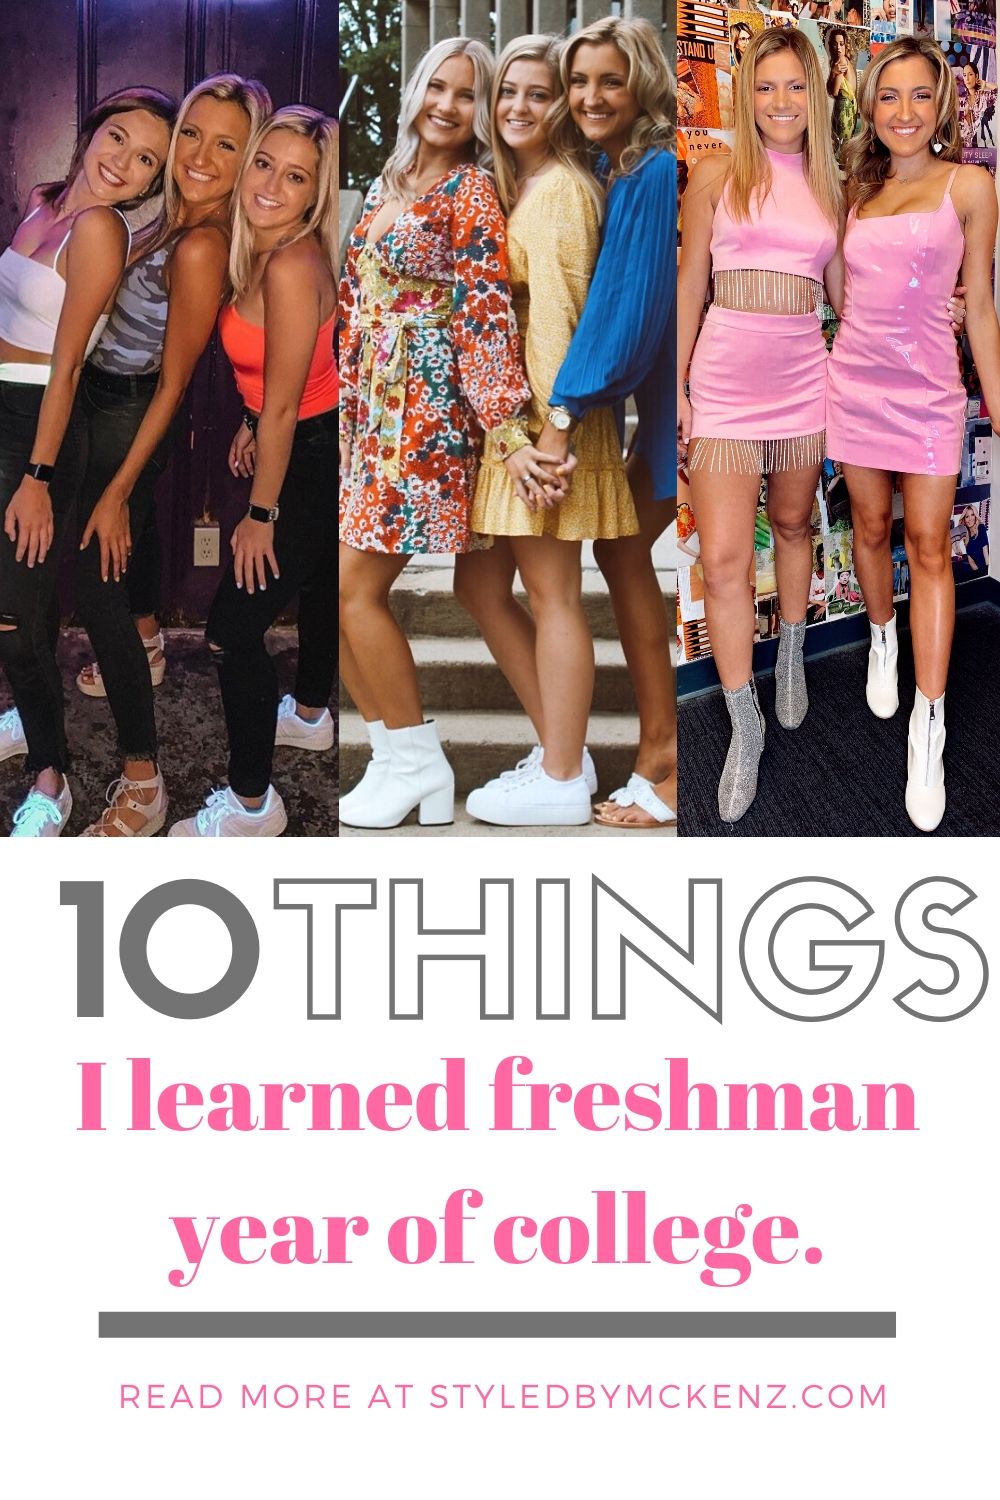 10 Things I learned Freshman Year Of College